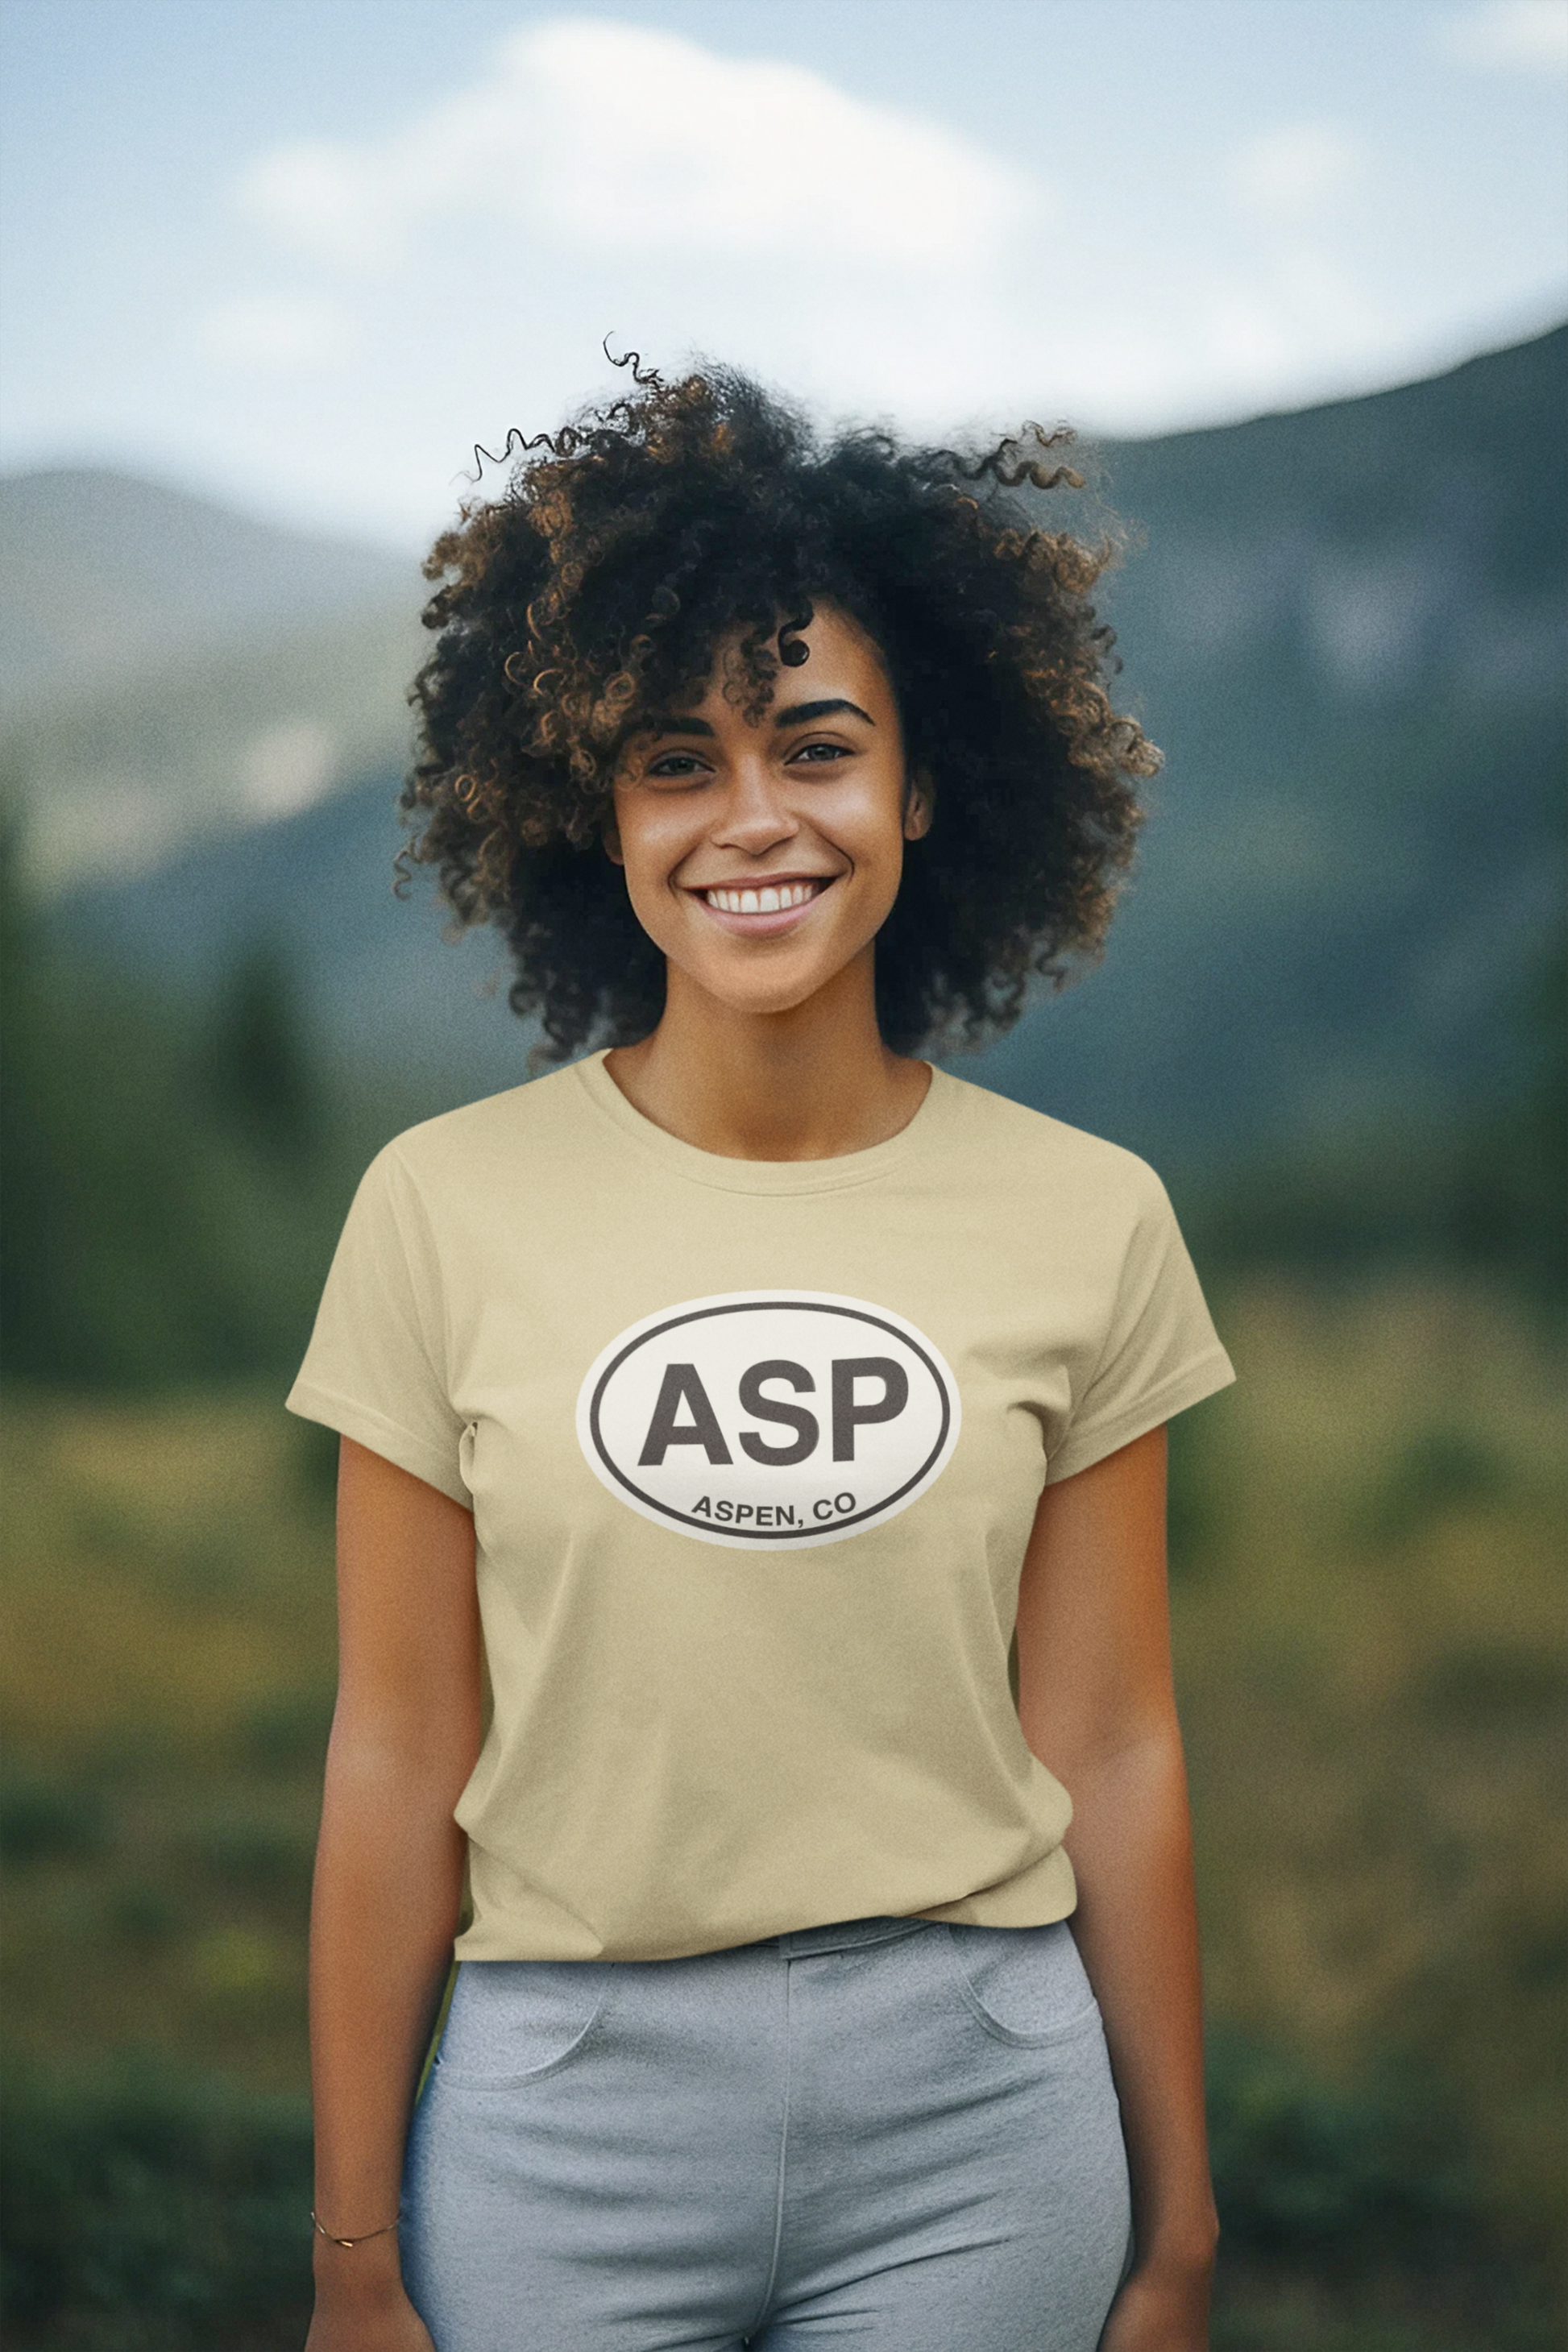 Women's T-Shirt with Aspen oval logo on front